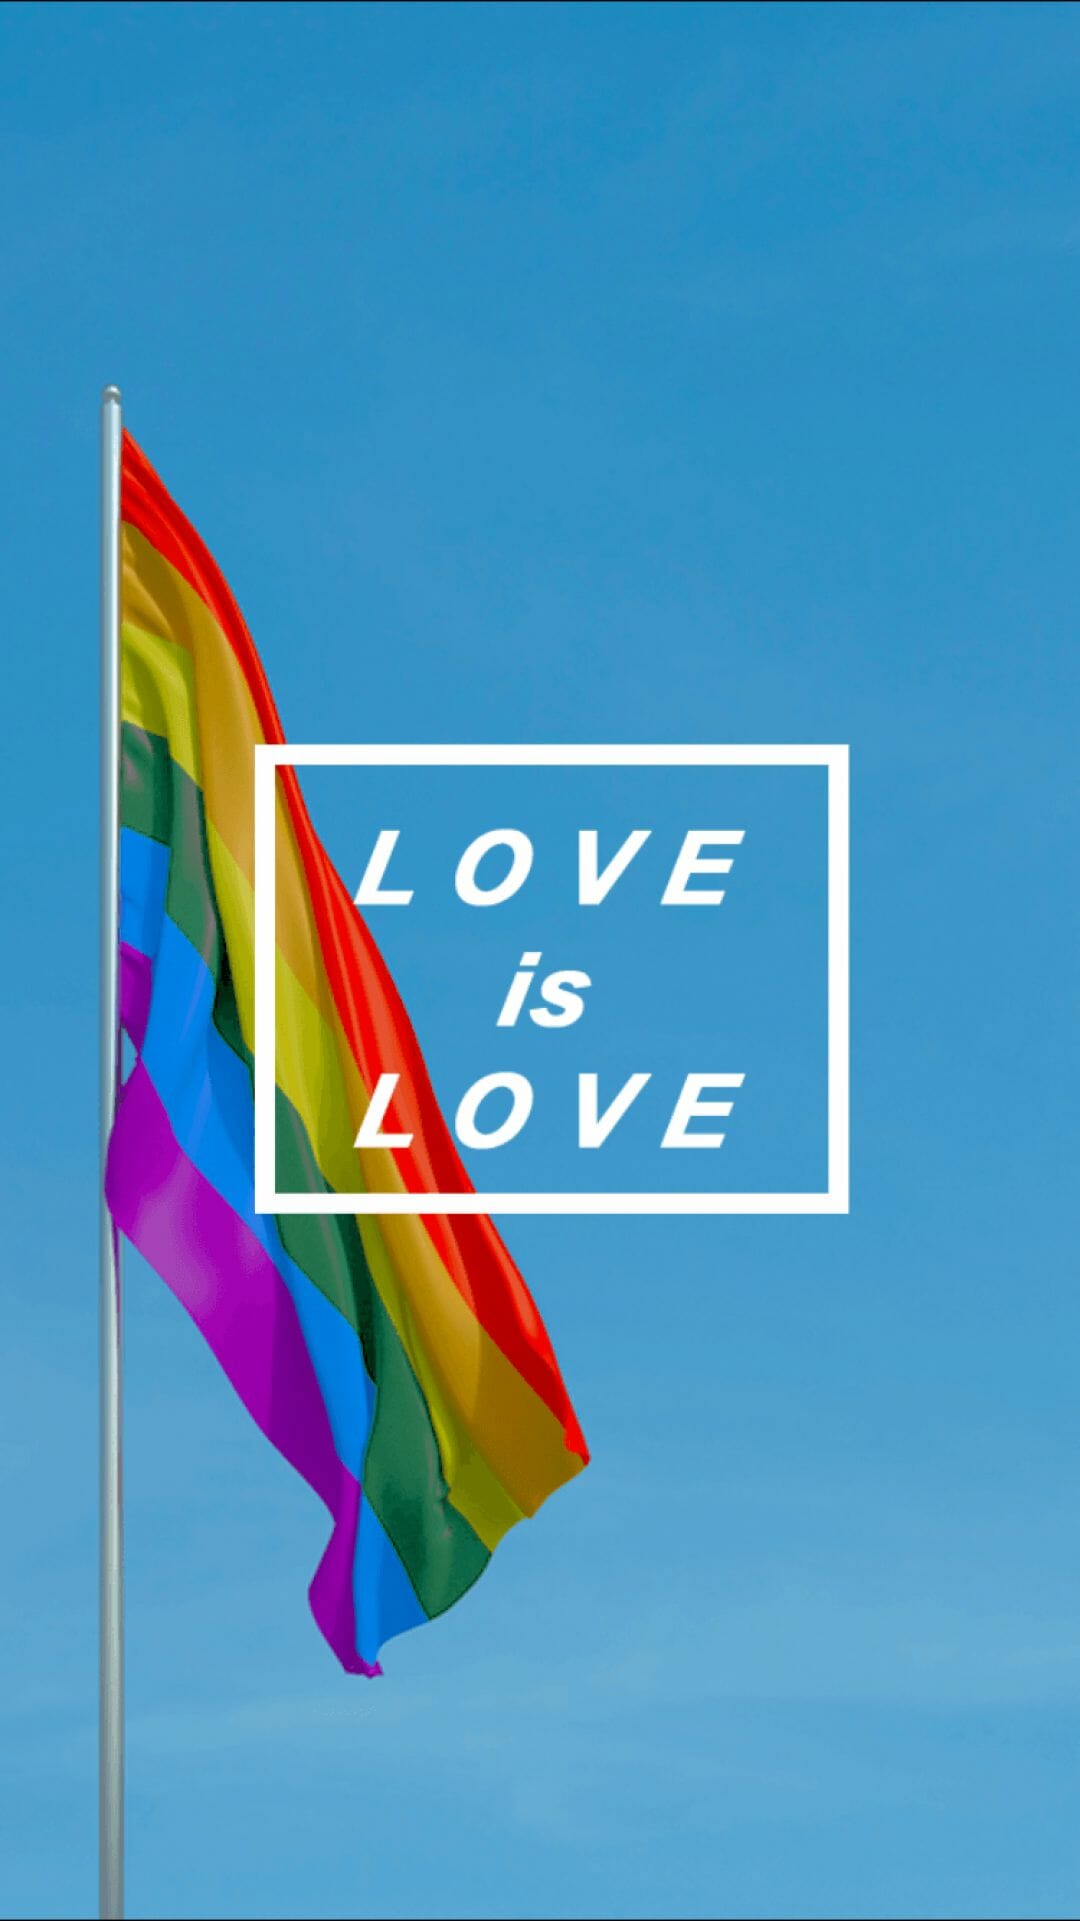 A rainbow flag with the words love is above it - LGBT, pride